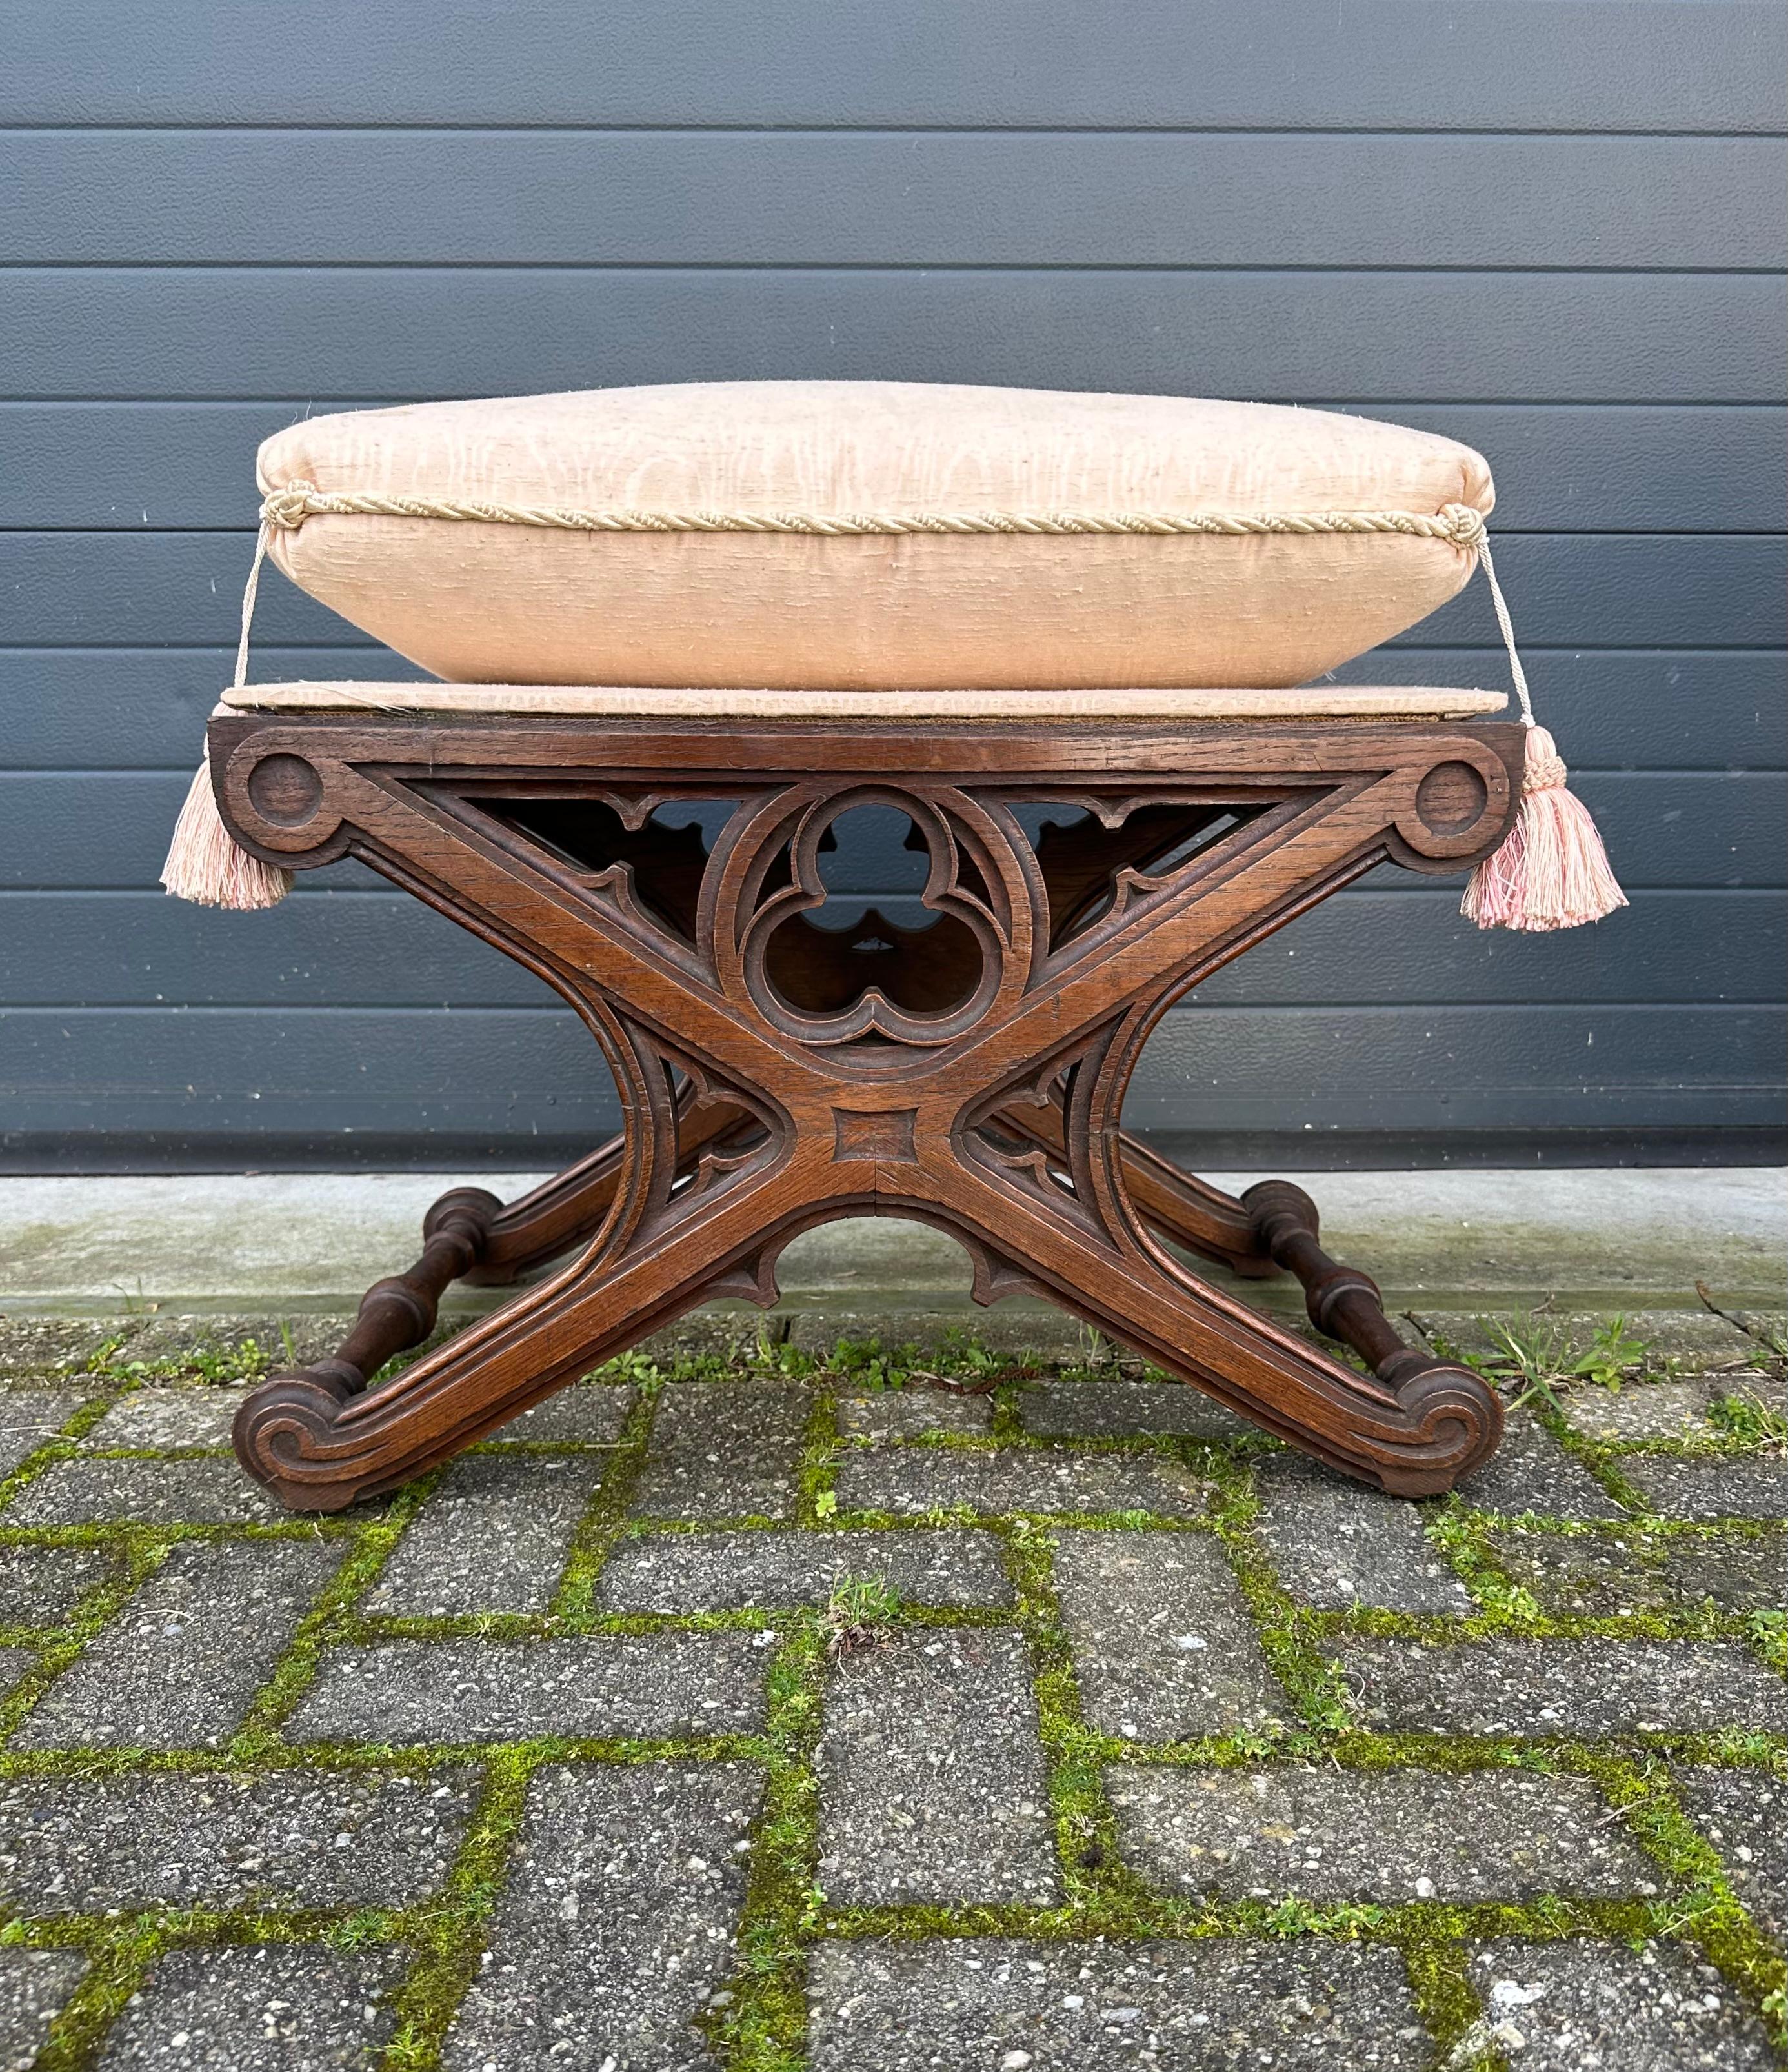 Antique, stunning and practical Gothic stool with a seat pillow with tassels.

This striking and perfect size Gothic stool is as stable as the day it was handmade & hand-carved and the woodwork is in excellent condition. All handcrafted out of solid